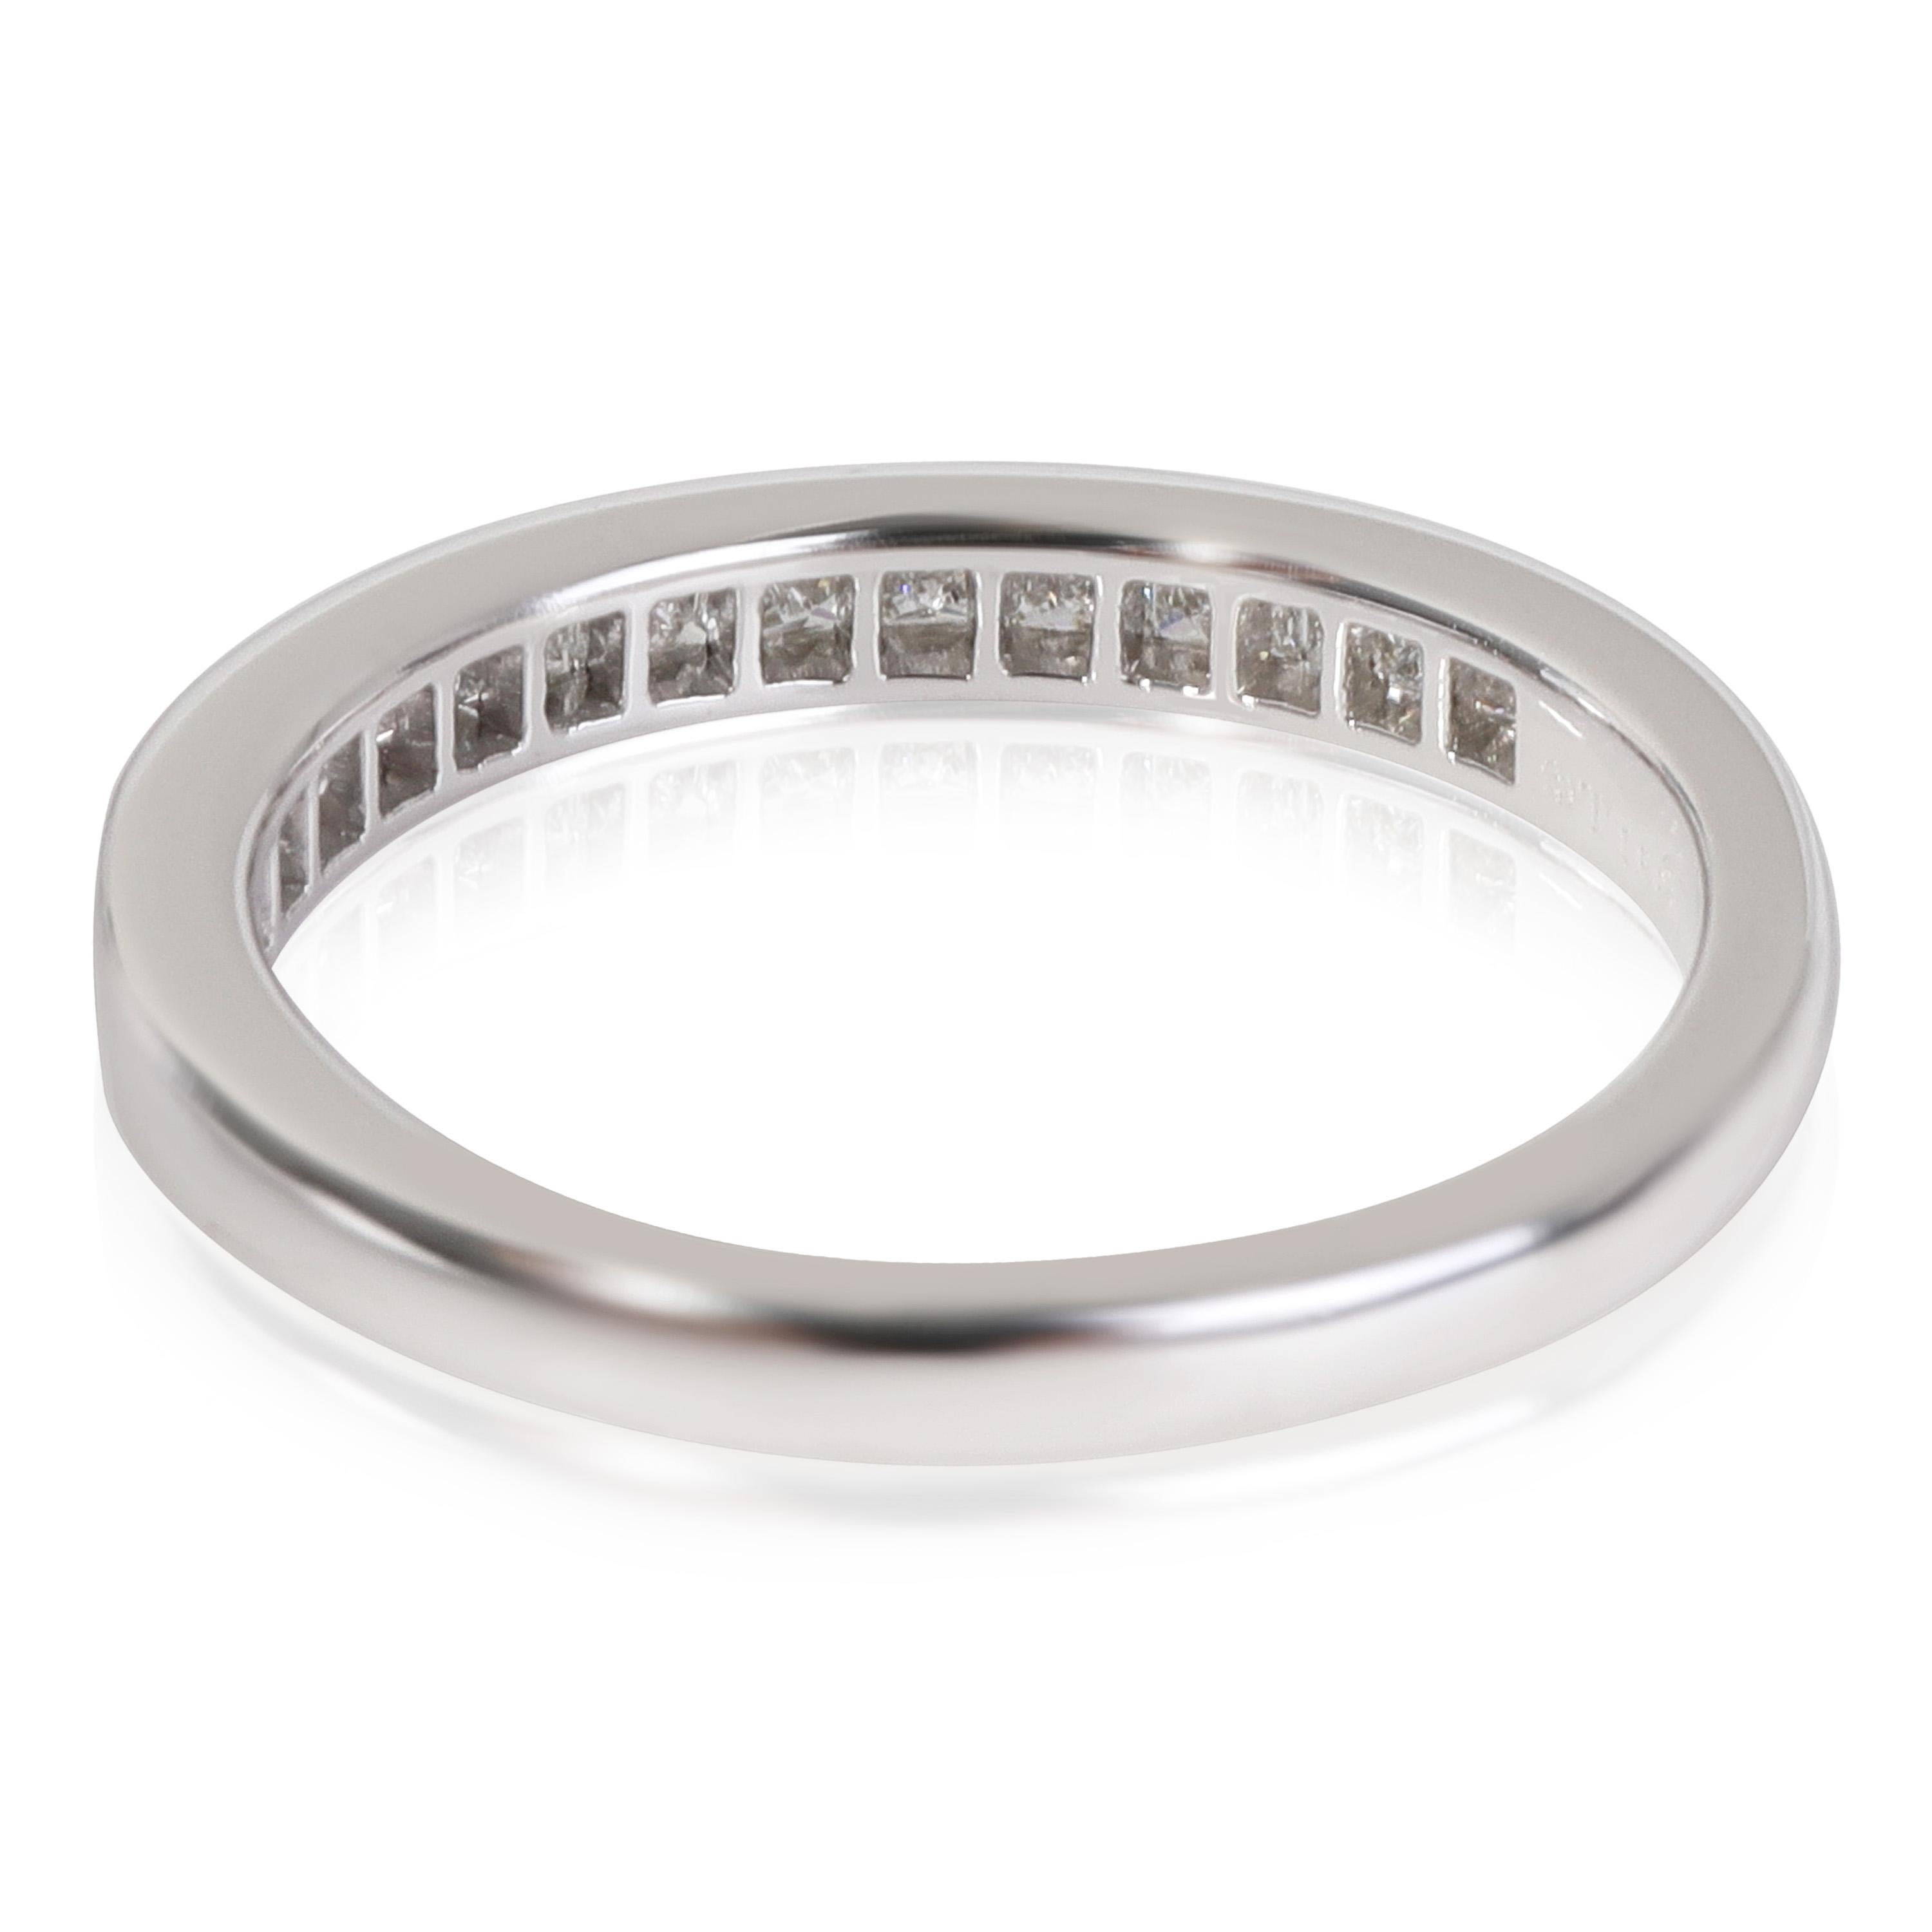 Tiffany & Co. Diamond Wedding Band in 950 Platinum 0.39 CTW

PRIMARY DETAILS
SKU: 118773
Listing Title: Tiffany & Co. Diamond Wedding Band in 950 Platinum 0.39 CTW
Condition Description: Retails for 3900 USD. In excellent condition and recently